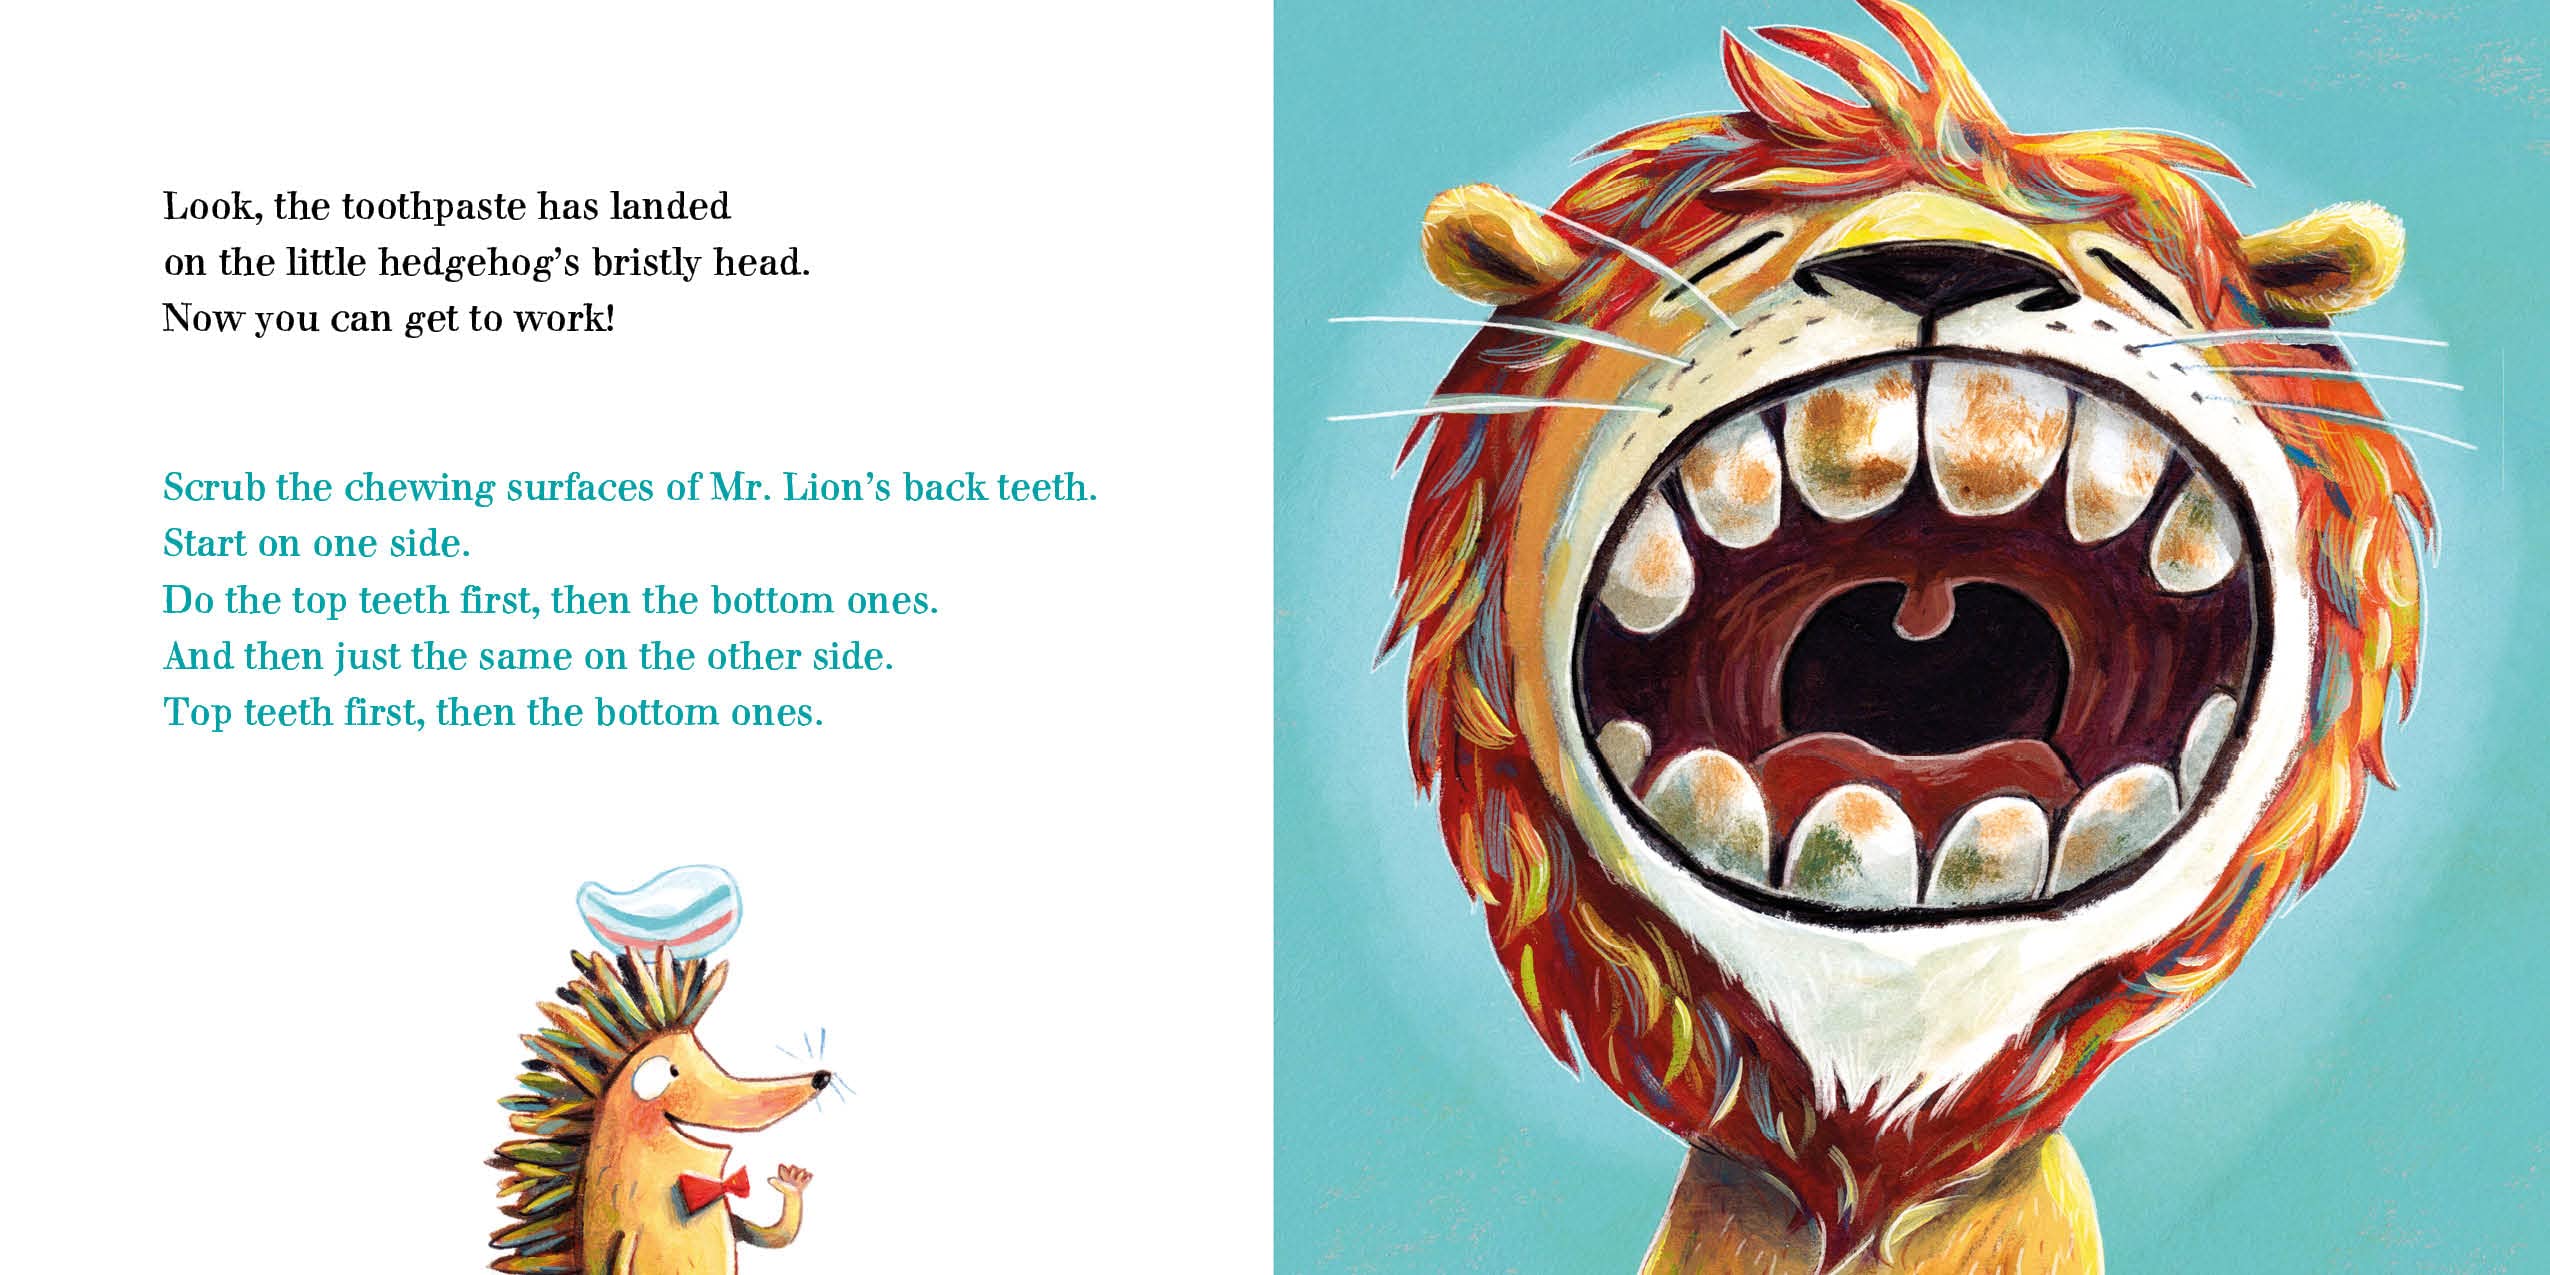 Help the Lion Brush His Teeth! (Parent Child Activity Book – Making Learning About Brushing Your Teeth Engaging and Fun for Toddlers Aged 2-4)